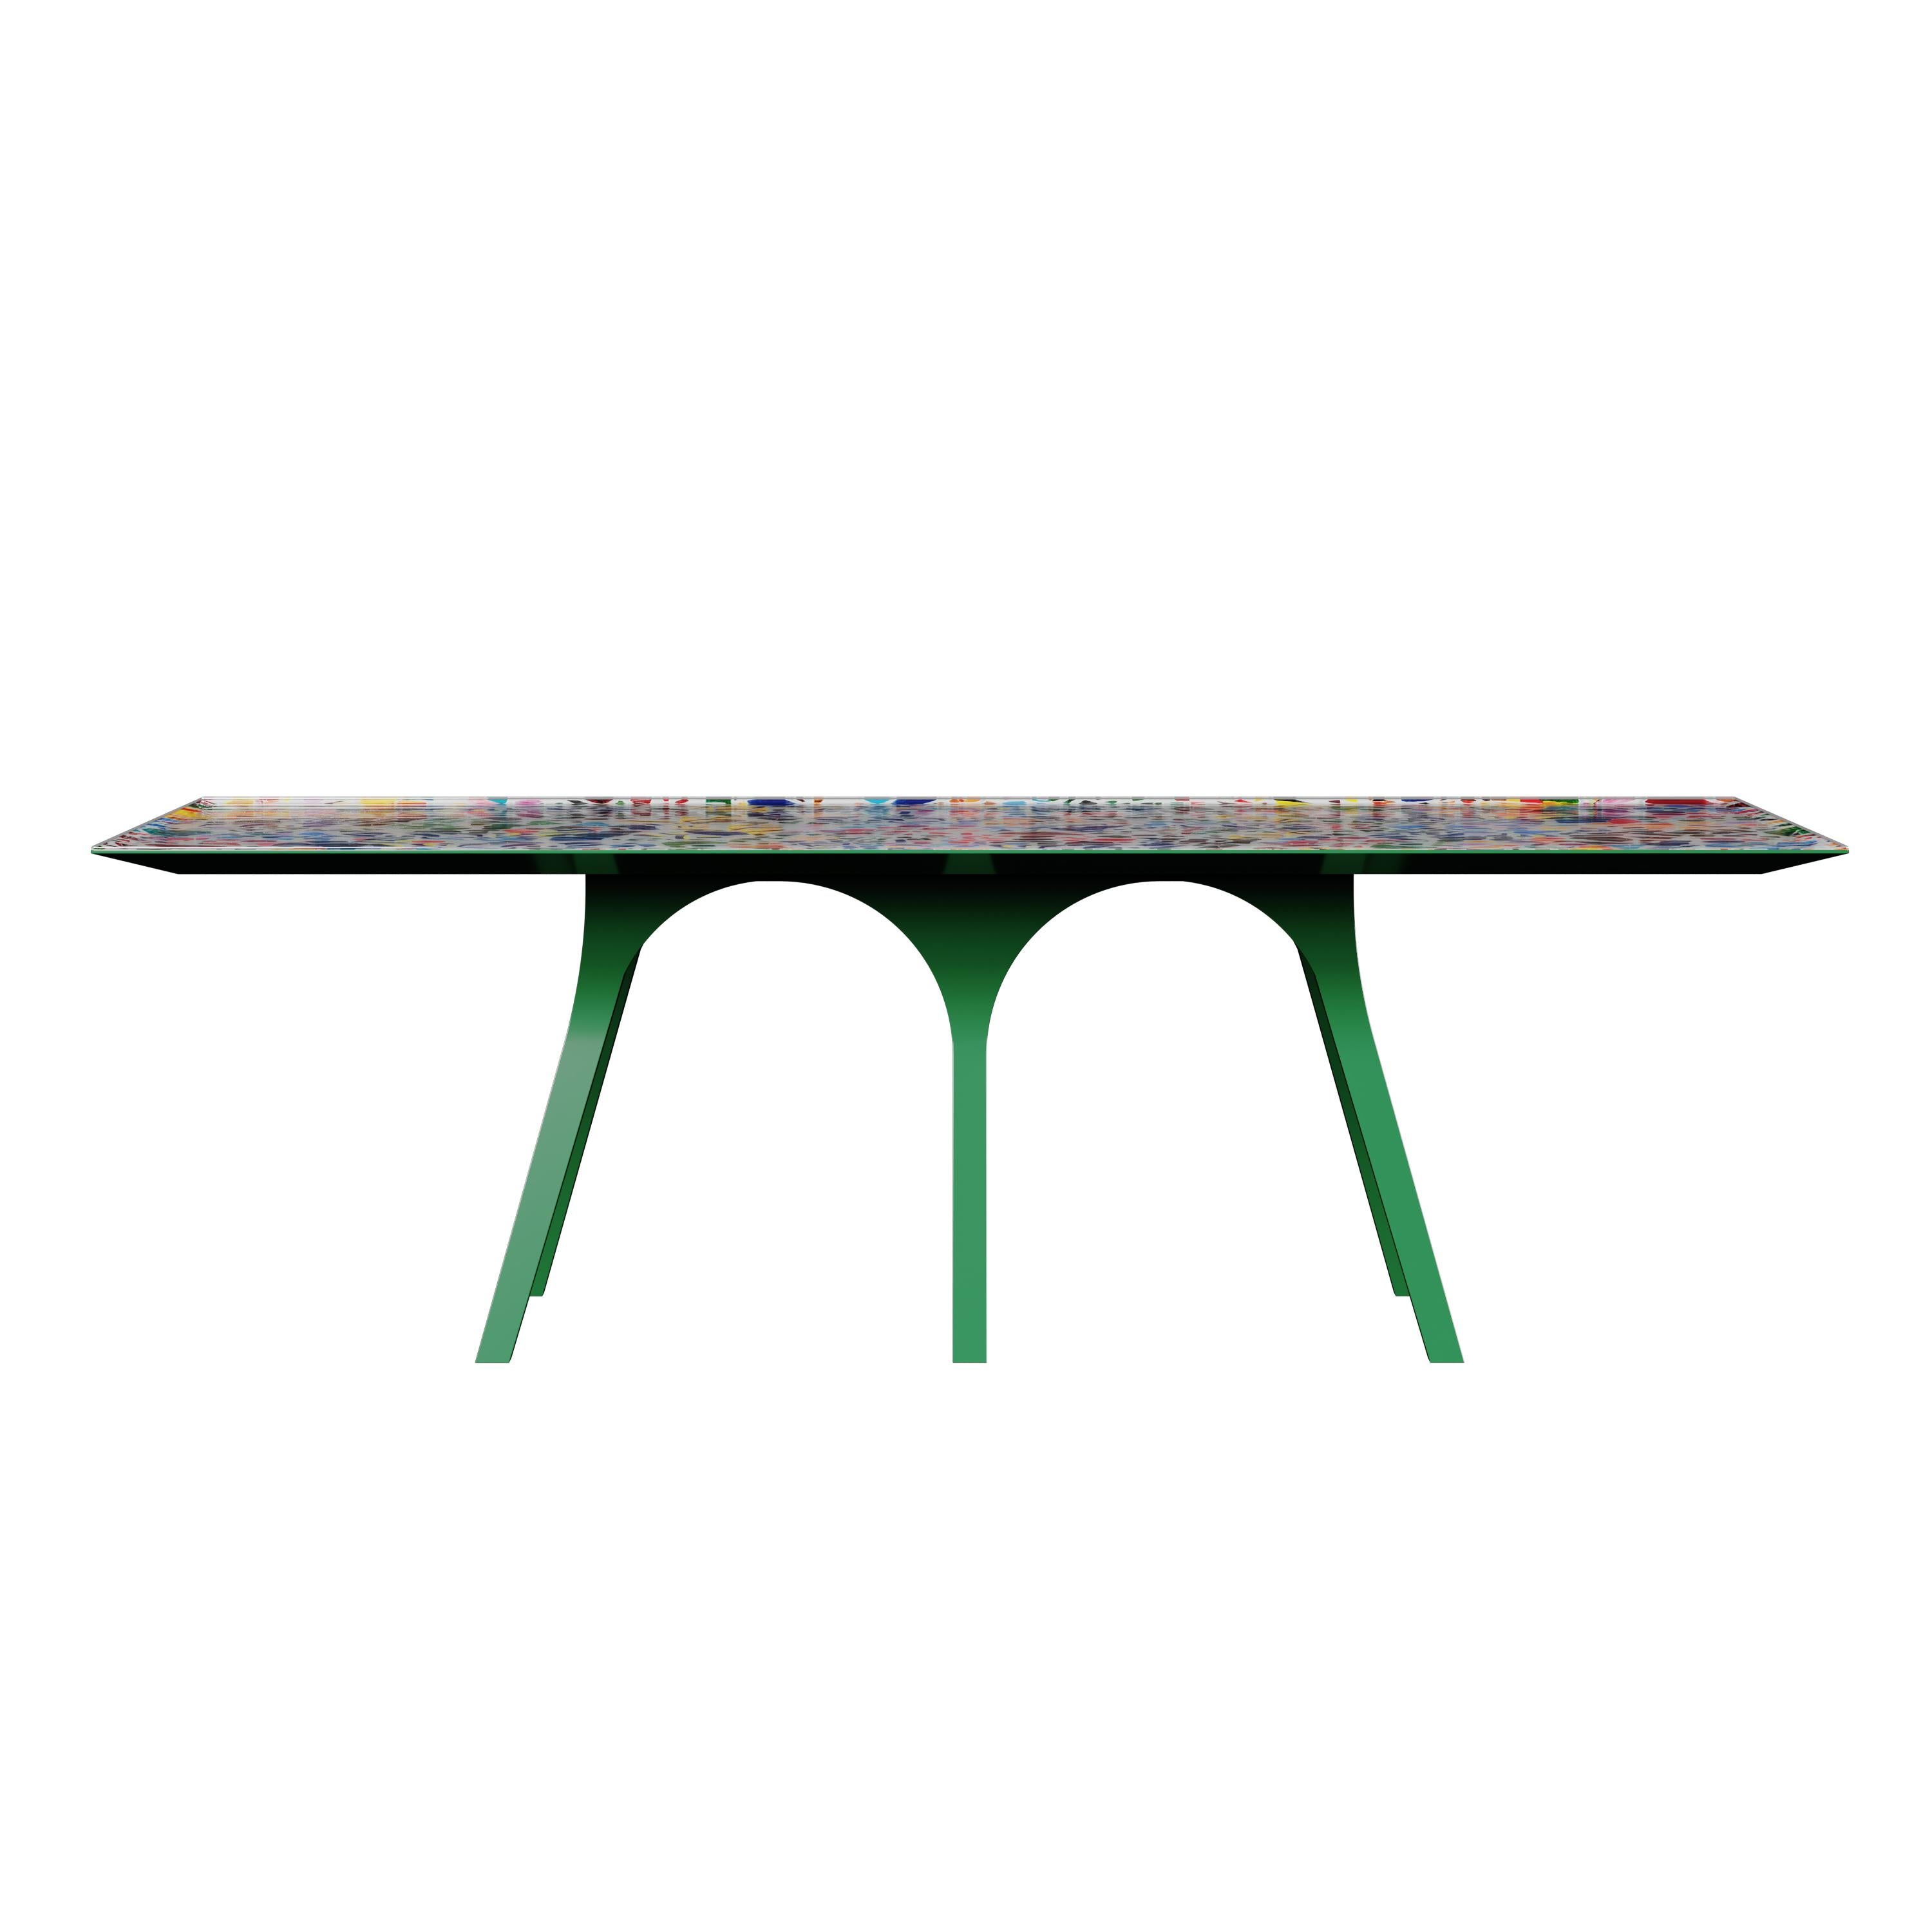 The eccentric and remarkable buildings of the Spanish artistic reference, Gaudi, inspired the Malabar designers to reinterpret his art by conceiving the Templo dining table. 
Based on the paradox of being modern without renouncing tradition by